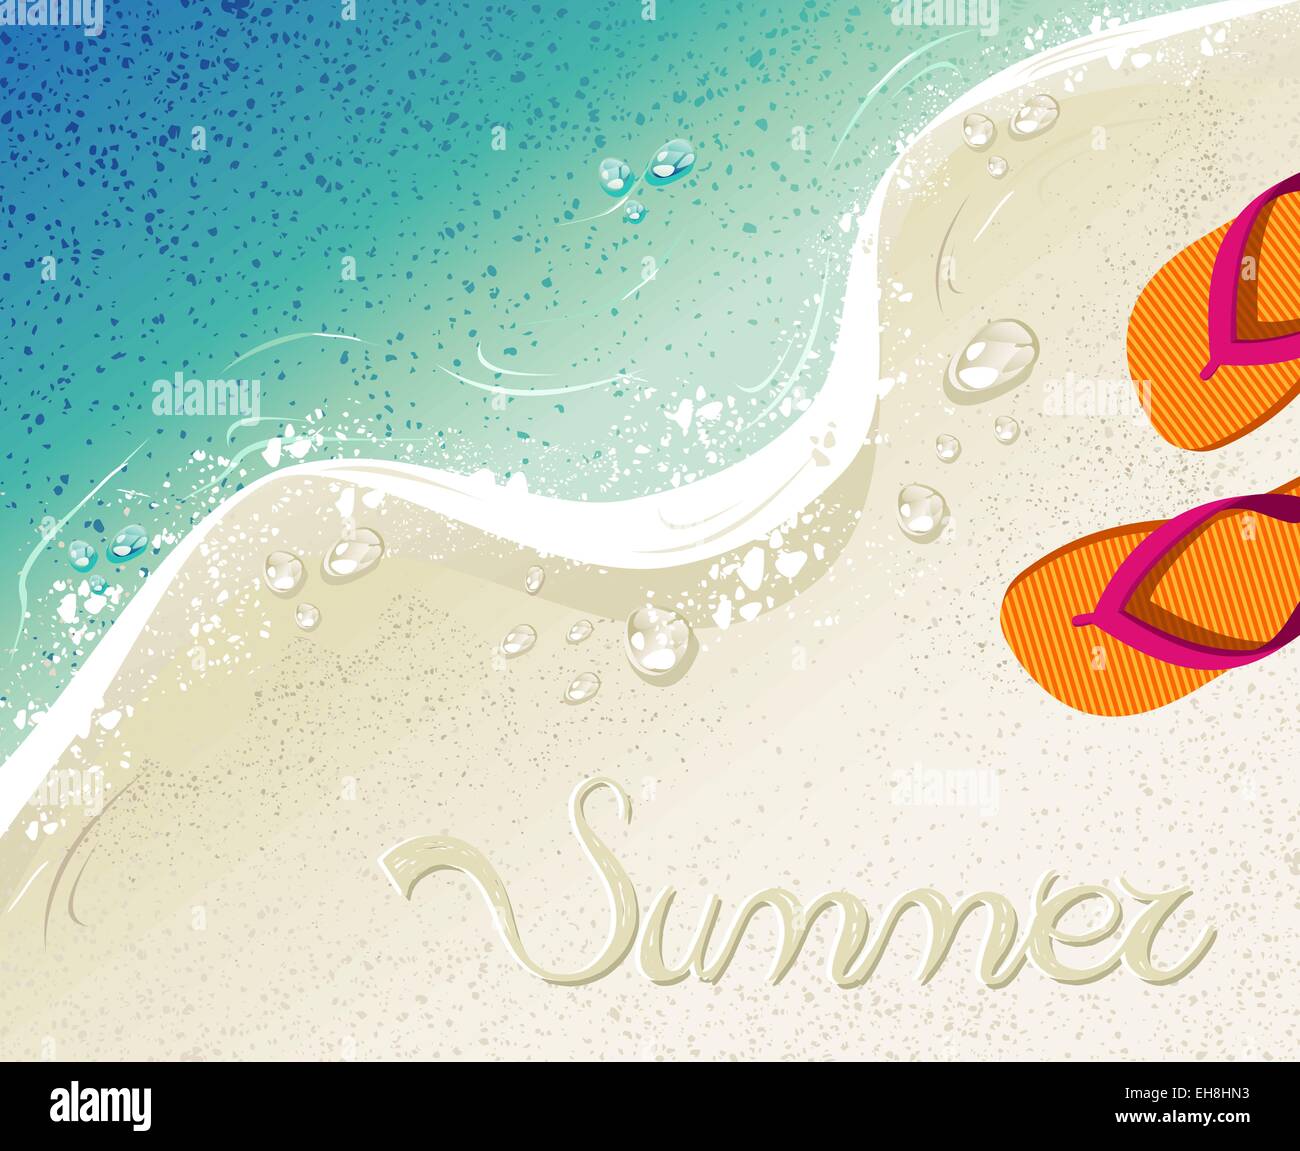 Beach and tropical sea with colorful flip flops, sand as background for summertime design. EPS10 vector. Stock Vector